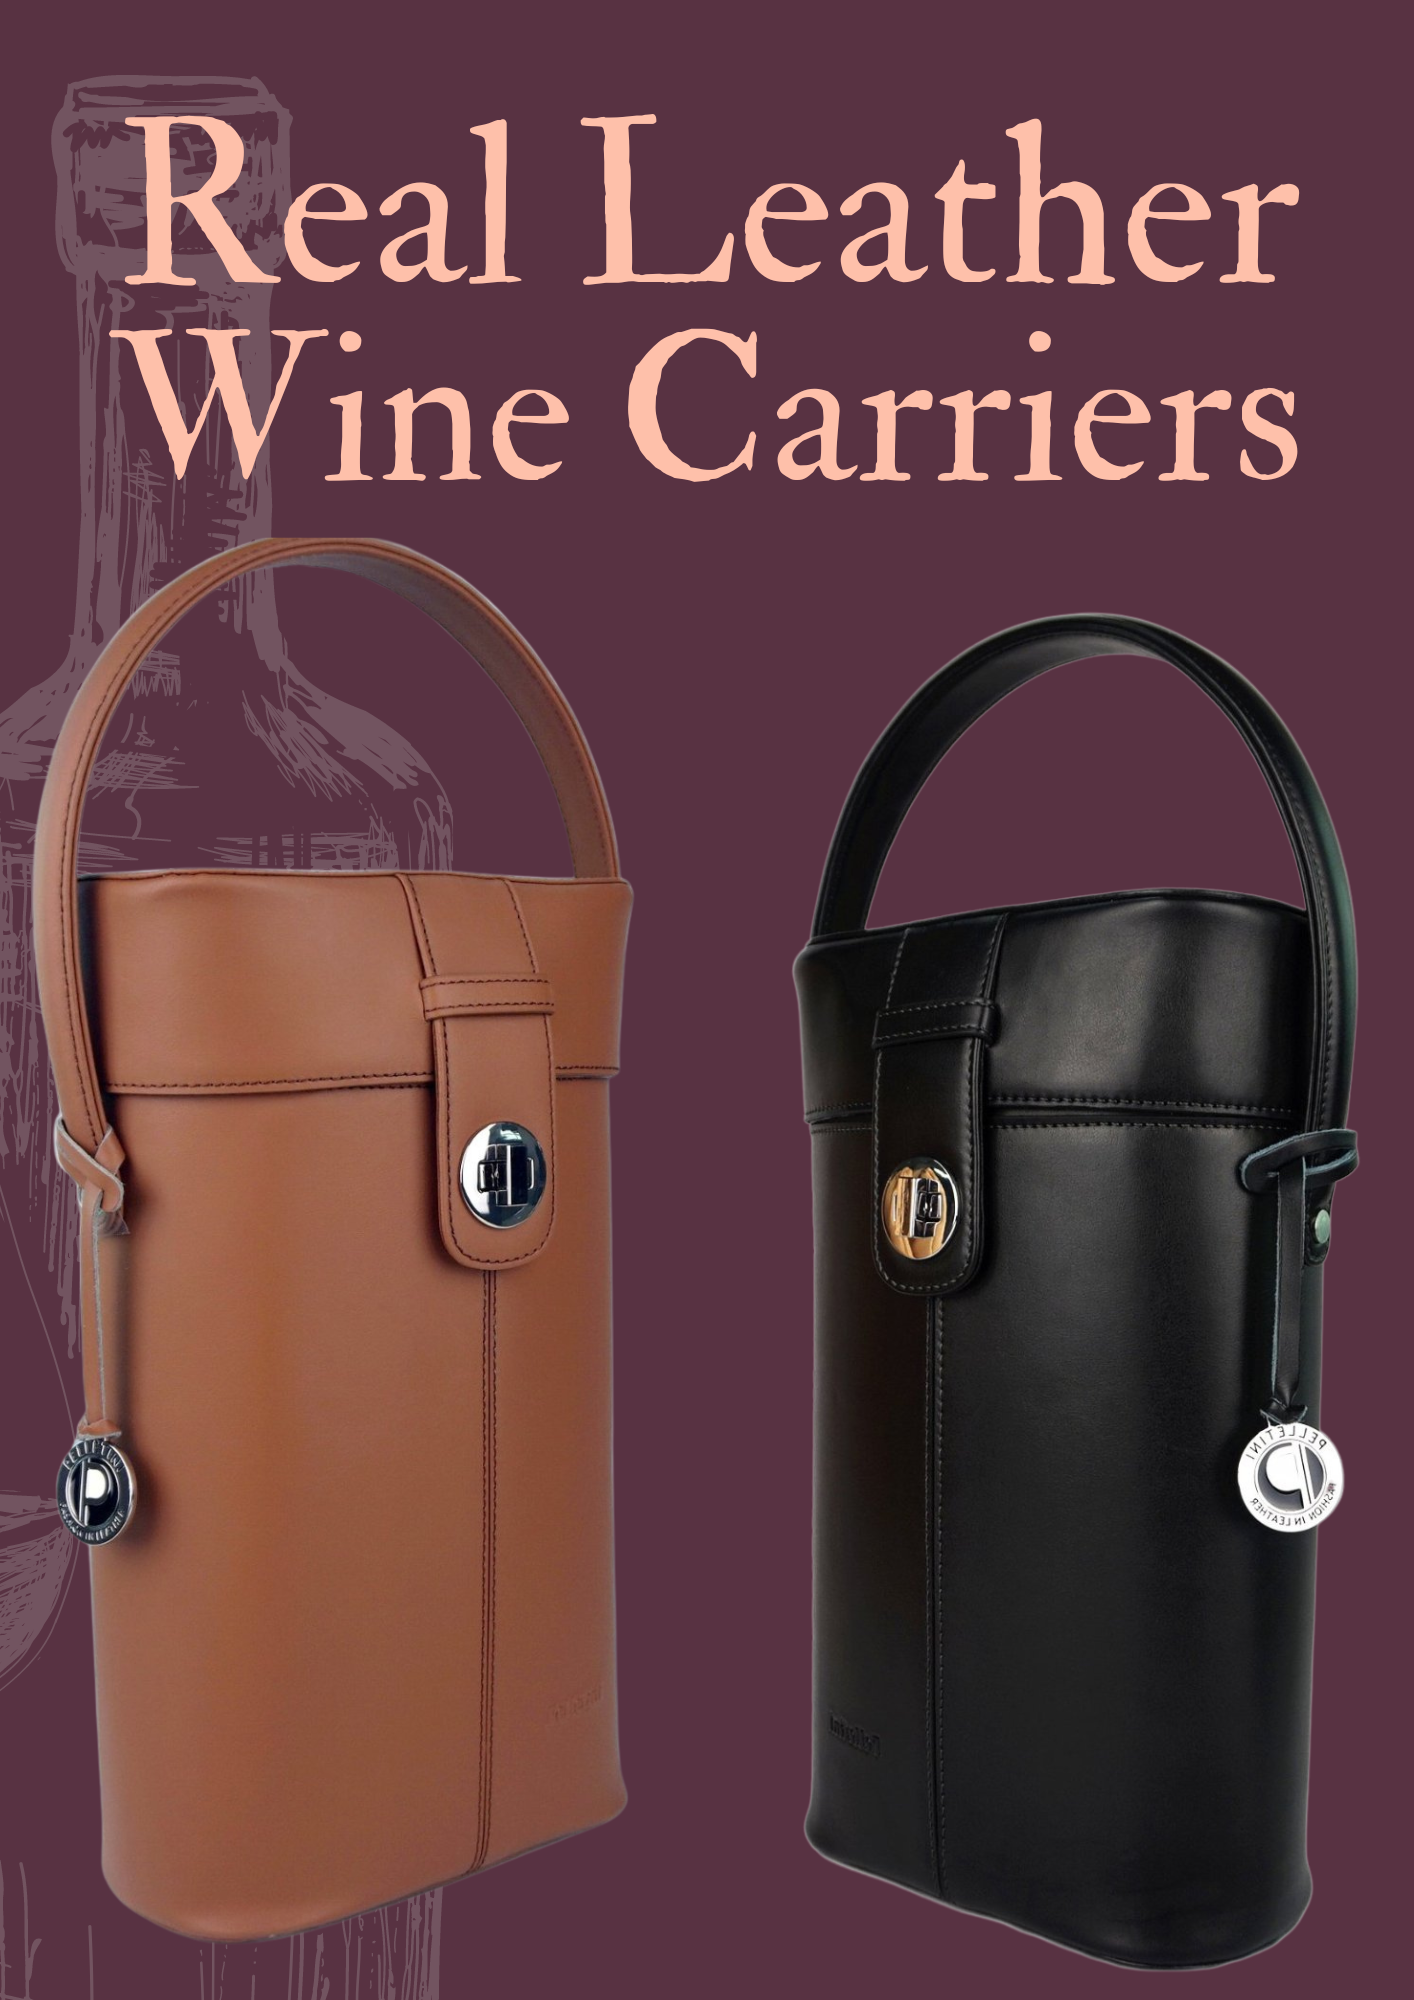 Real Leather Wine Carriers